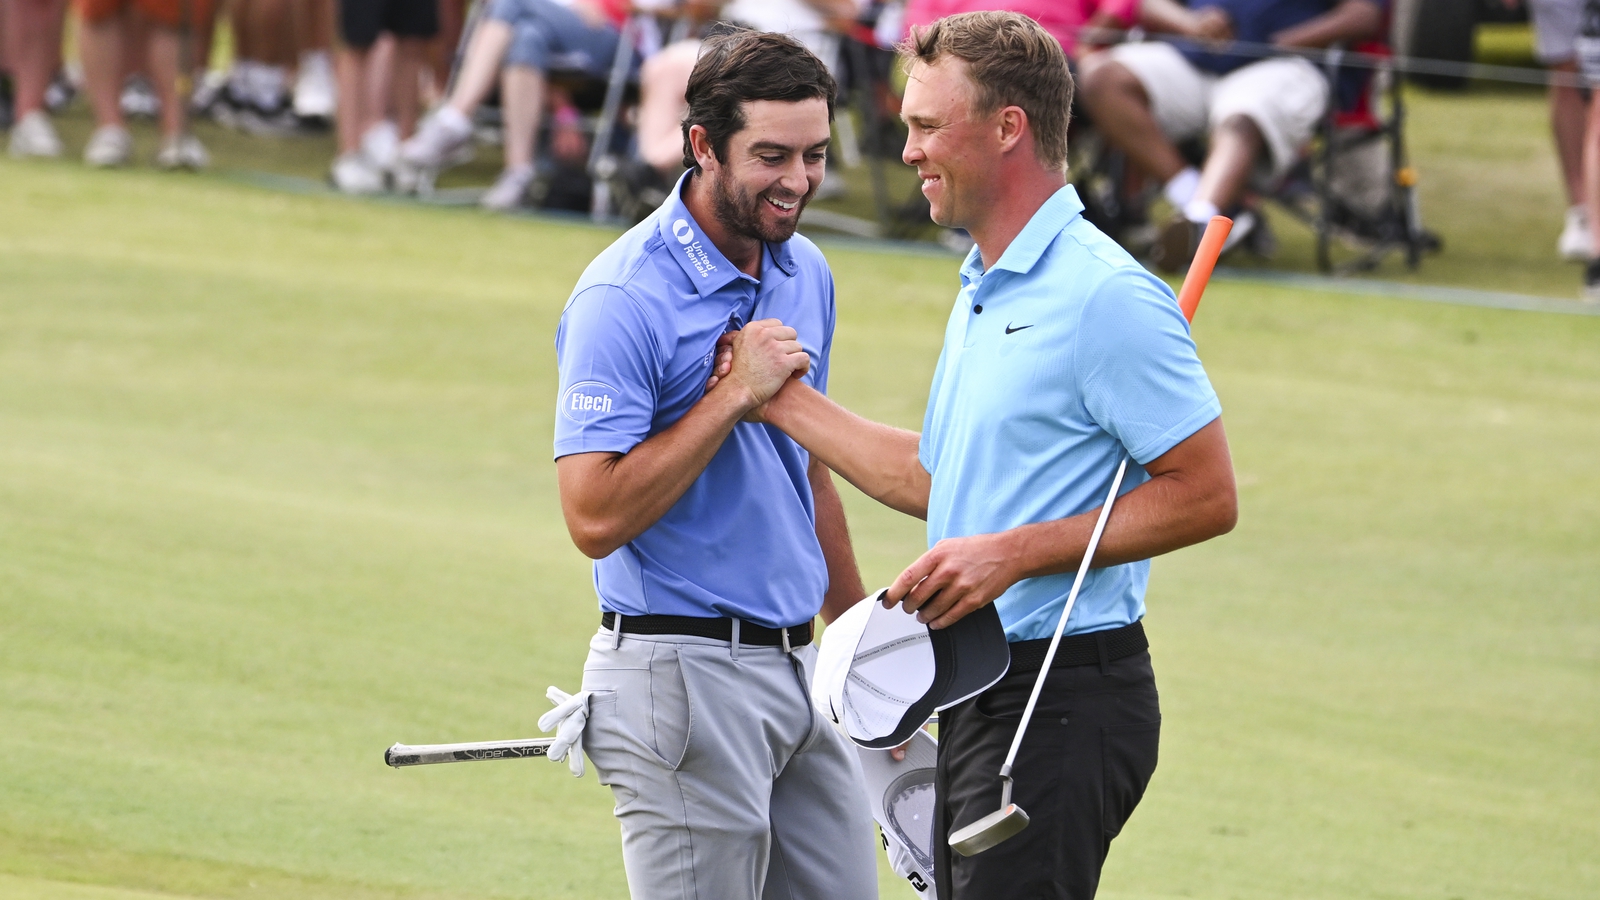 Riley, Hardy capture first PGA Tour wins at Zurich Classic - The